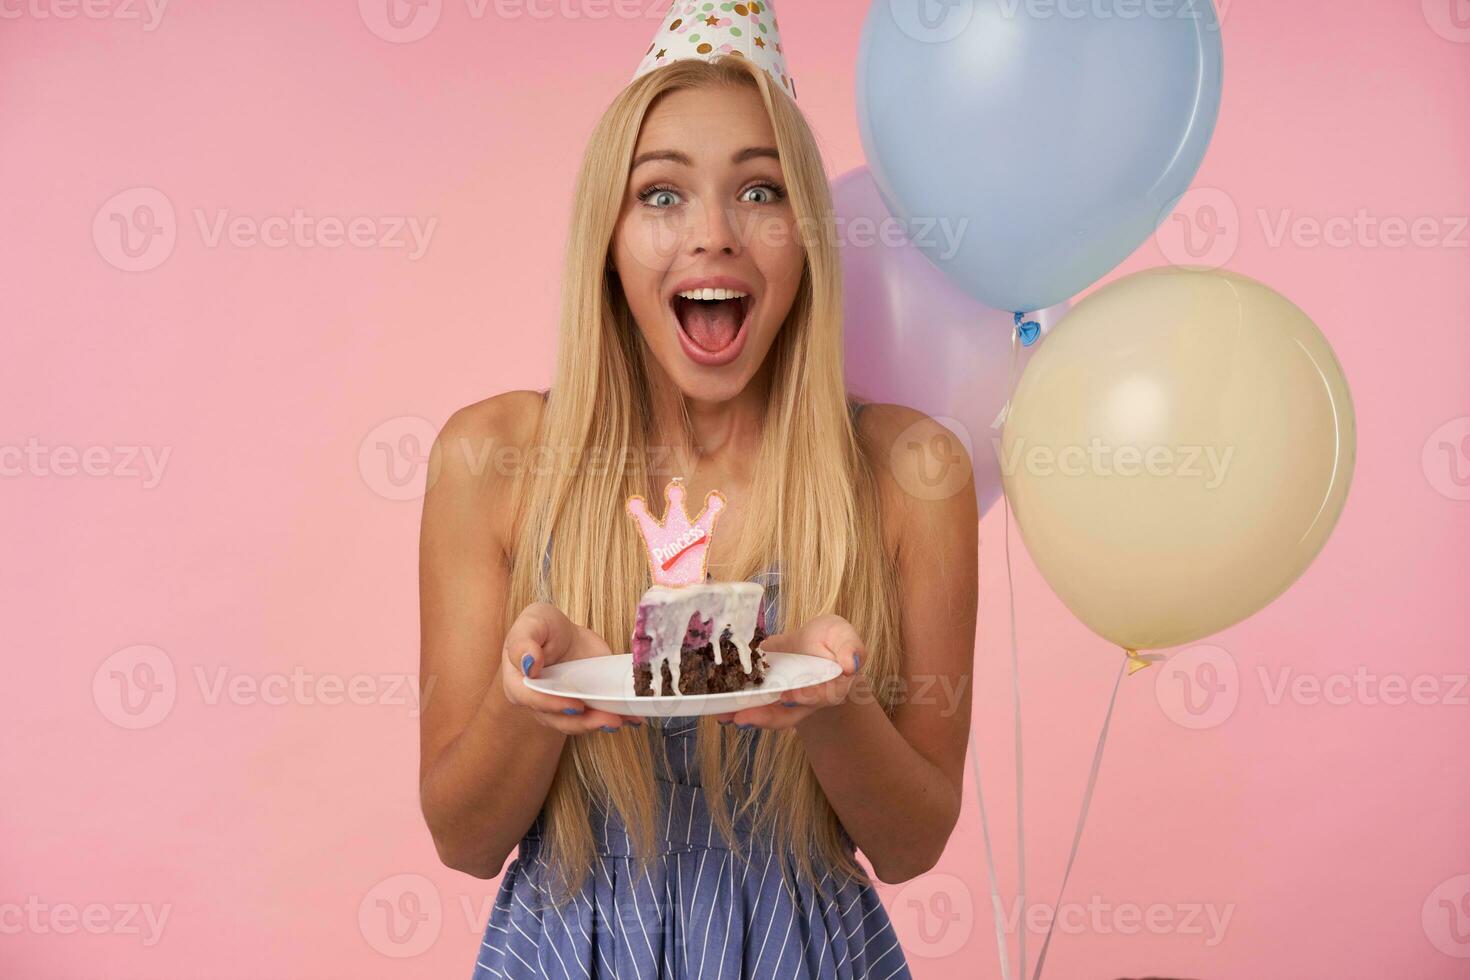 Joyful young pretty woman with long blonde hair wearing blue summer dress and cone hat, celebrating birthday and keeping piece of cake in hands, smiling widely over pink background photo